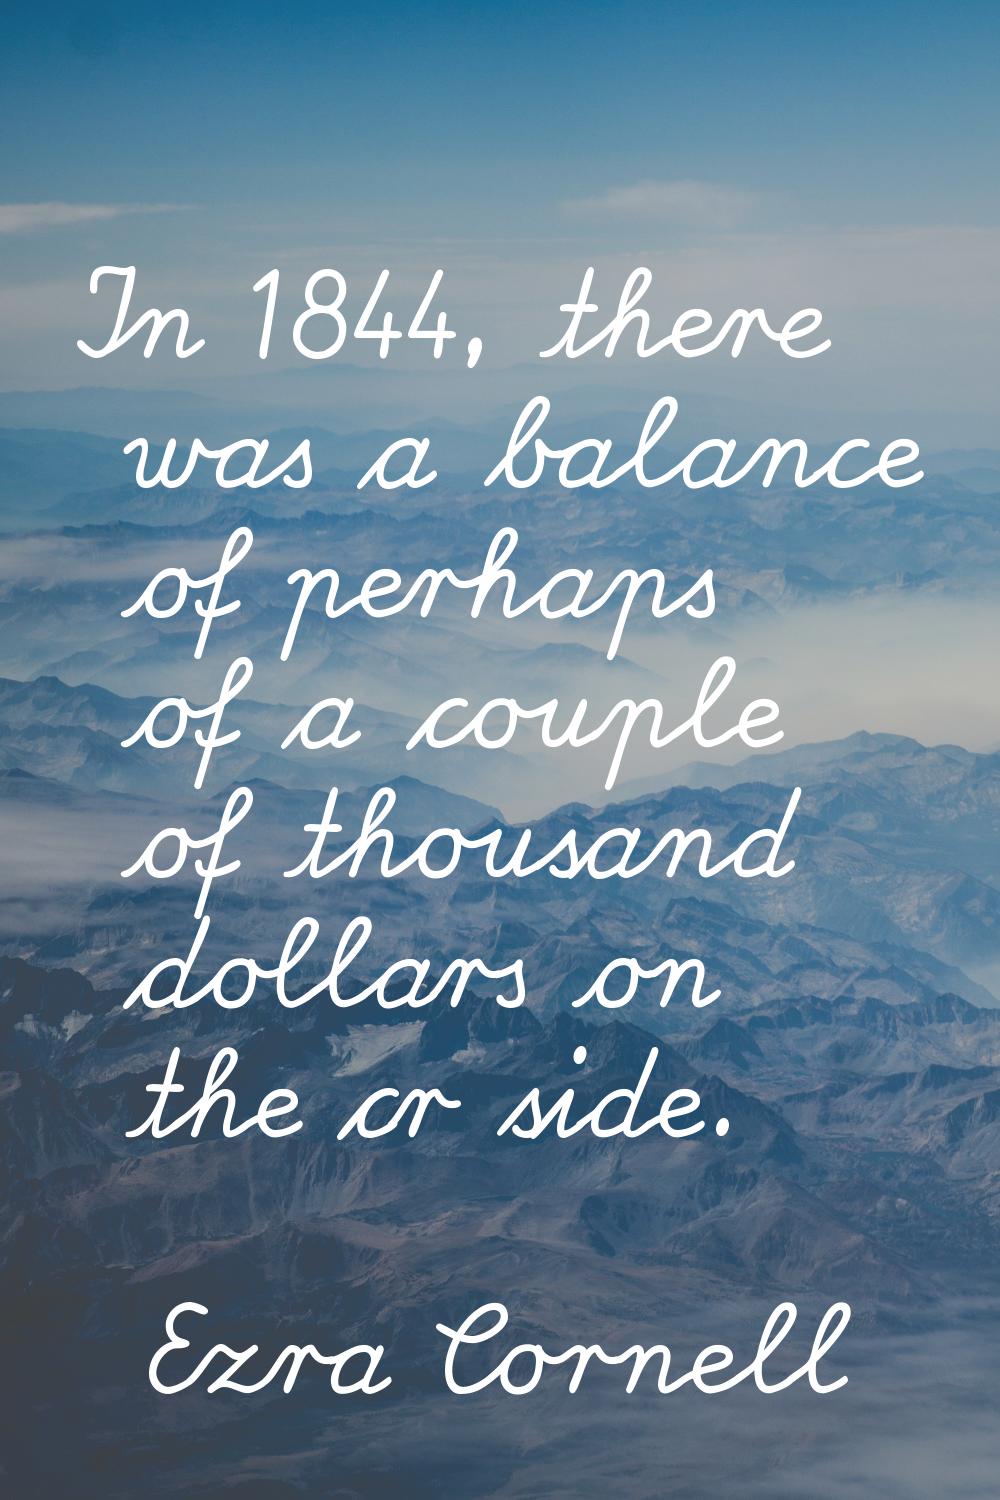 In 1844, there was a balance of perhaps of a couple of thousand dollars on the cr side.